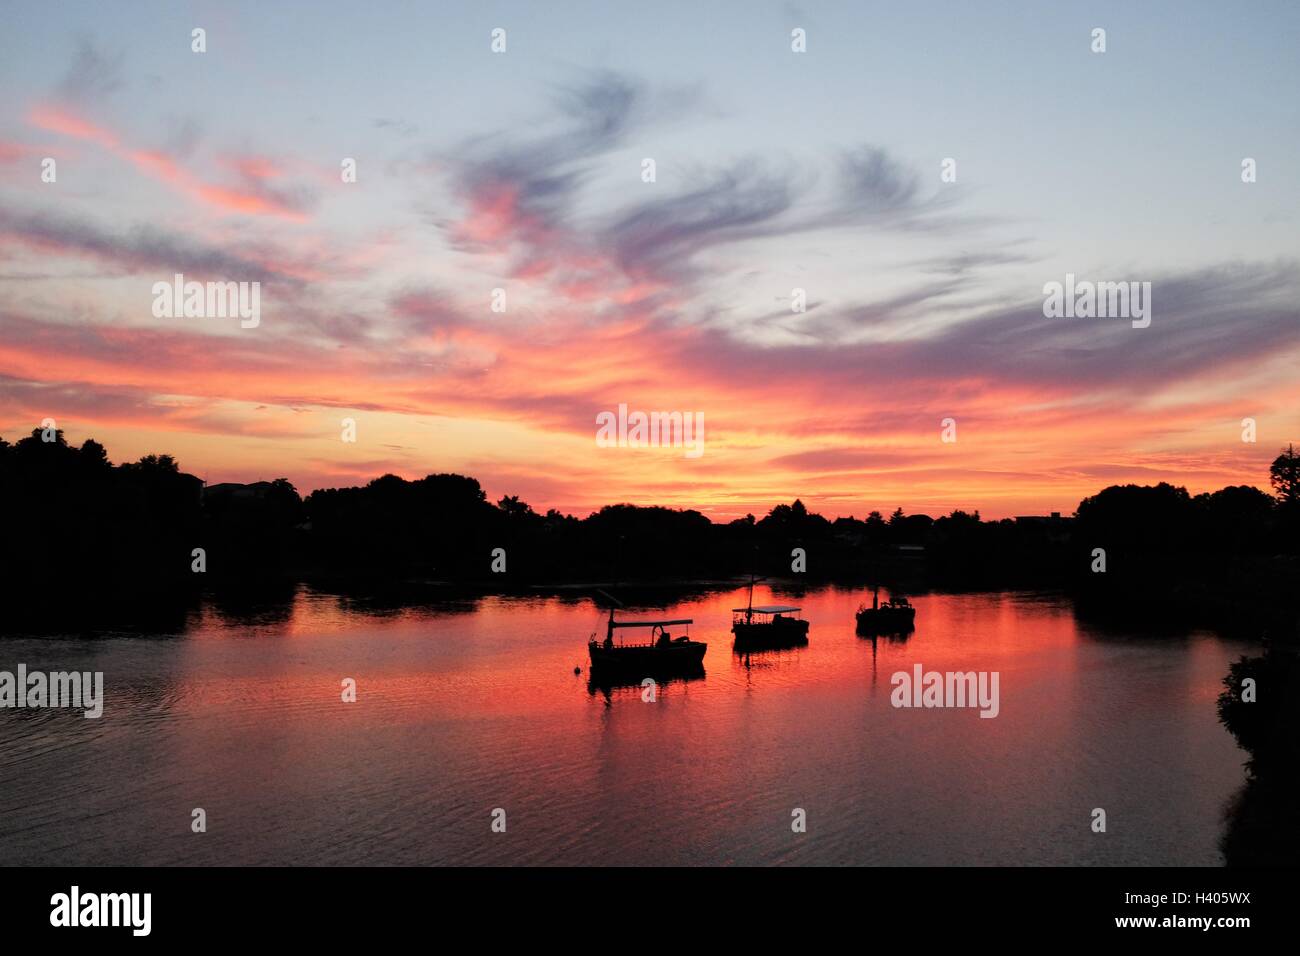 Silhouette of boats on Dordogne river at sunset, Bergerac, France Stock Photo